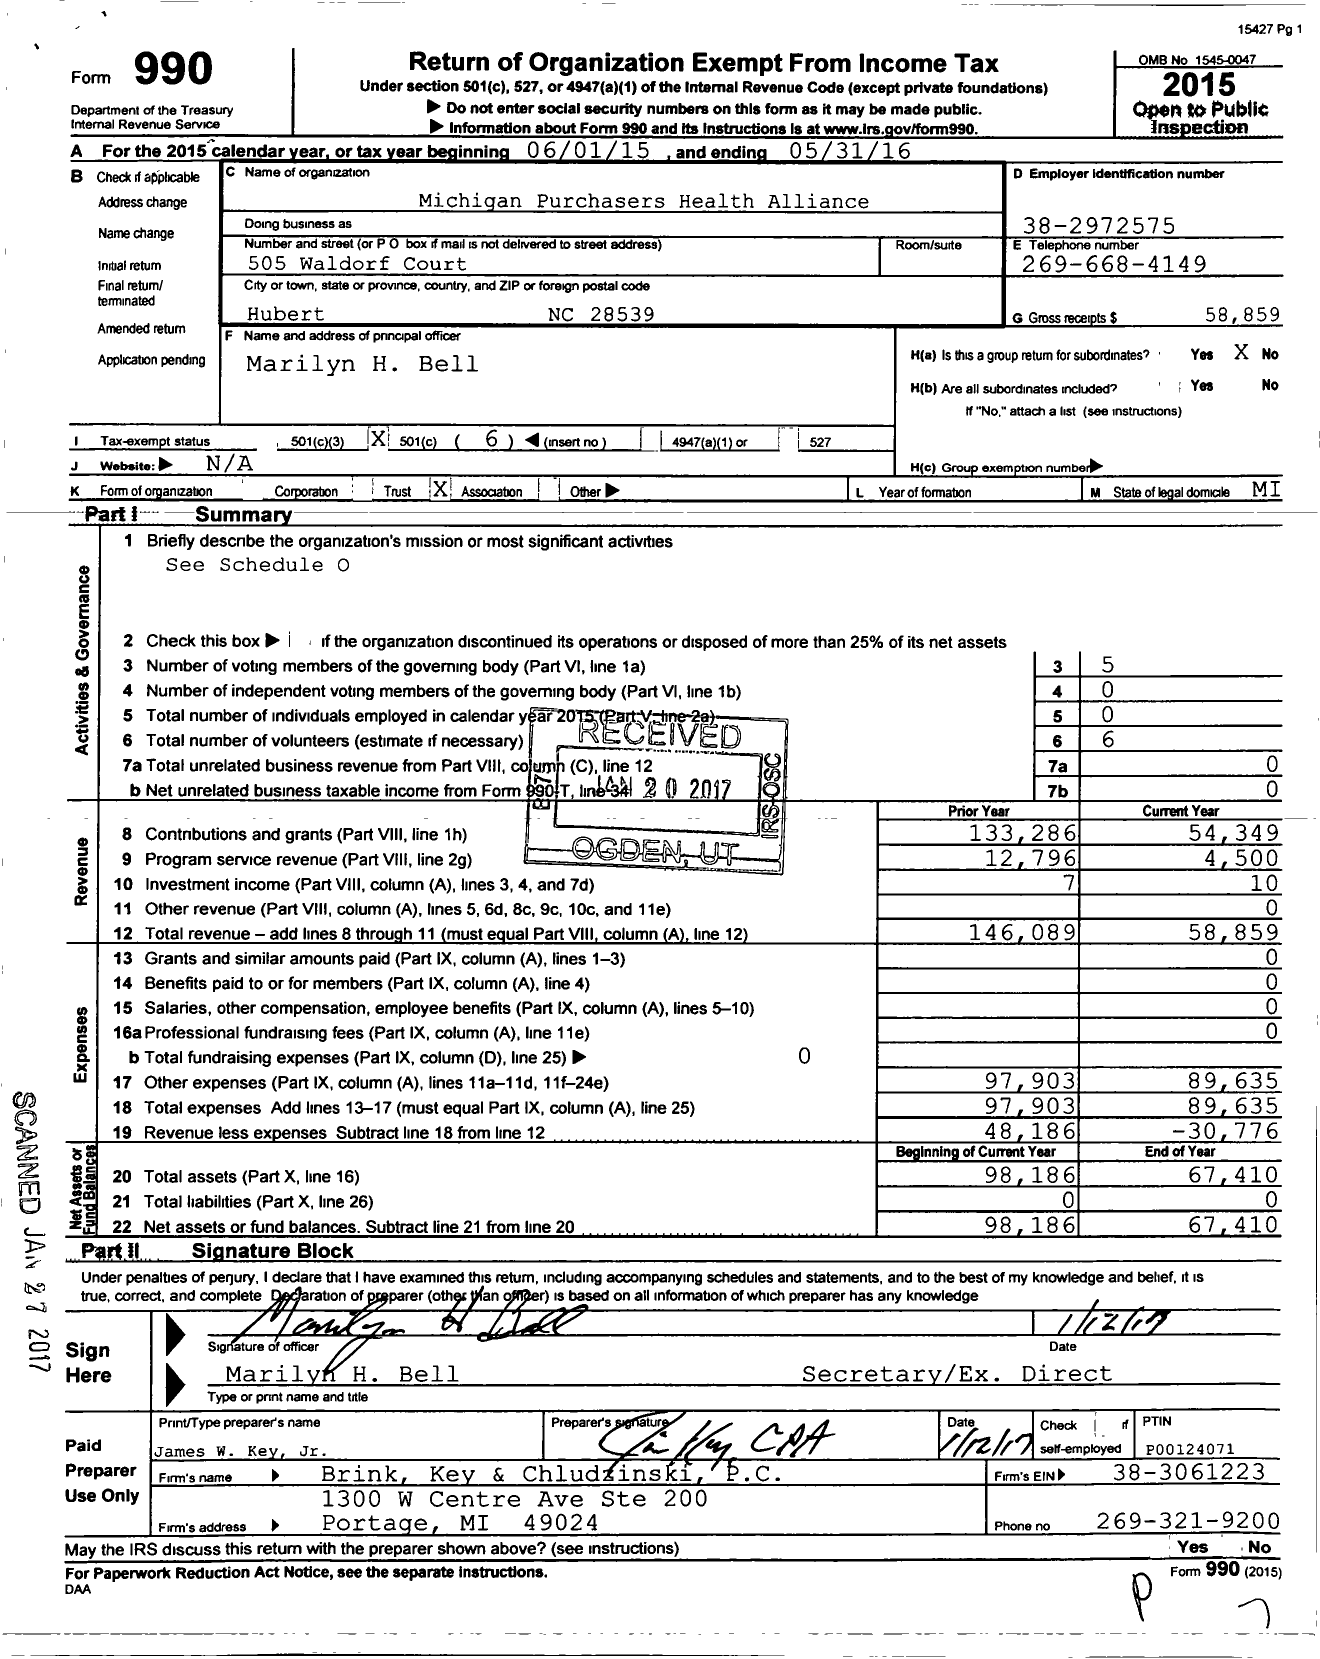 Image of first page of 2015 Form 990O for Michigan Purchasers Health Alliance